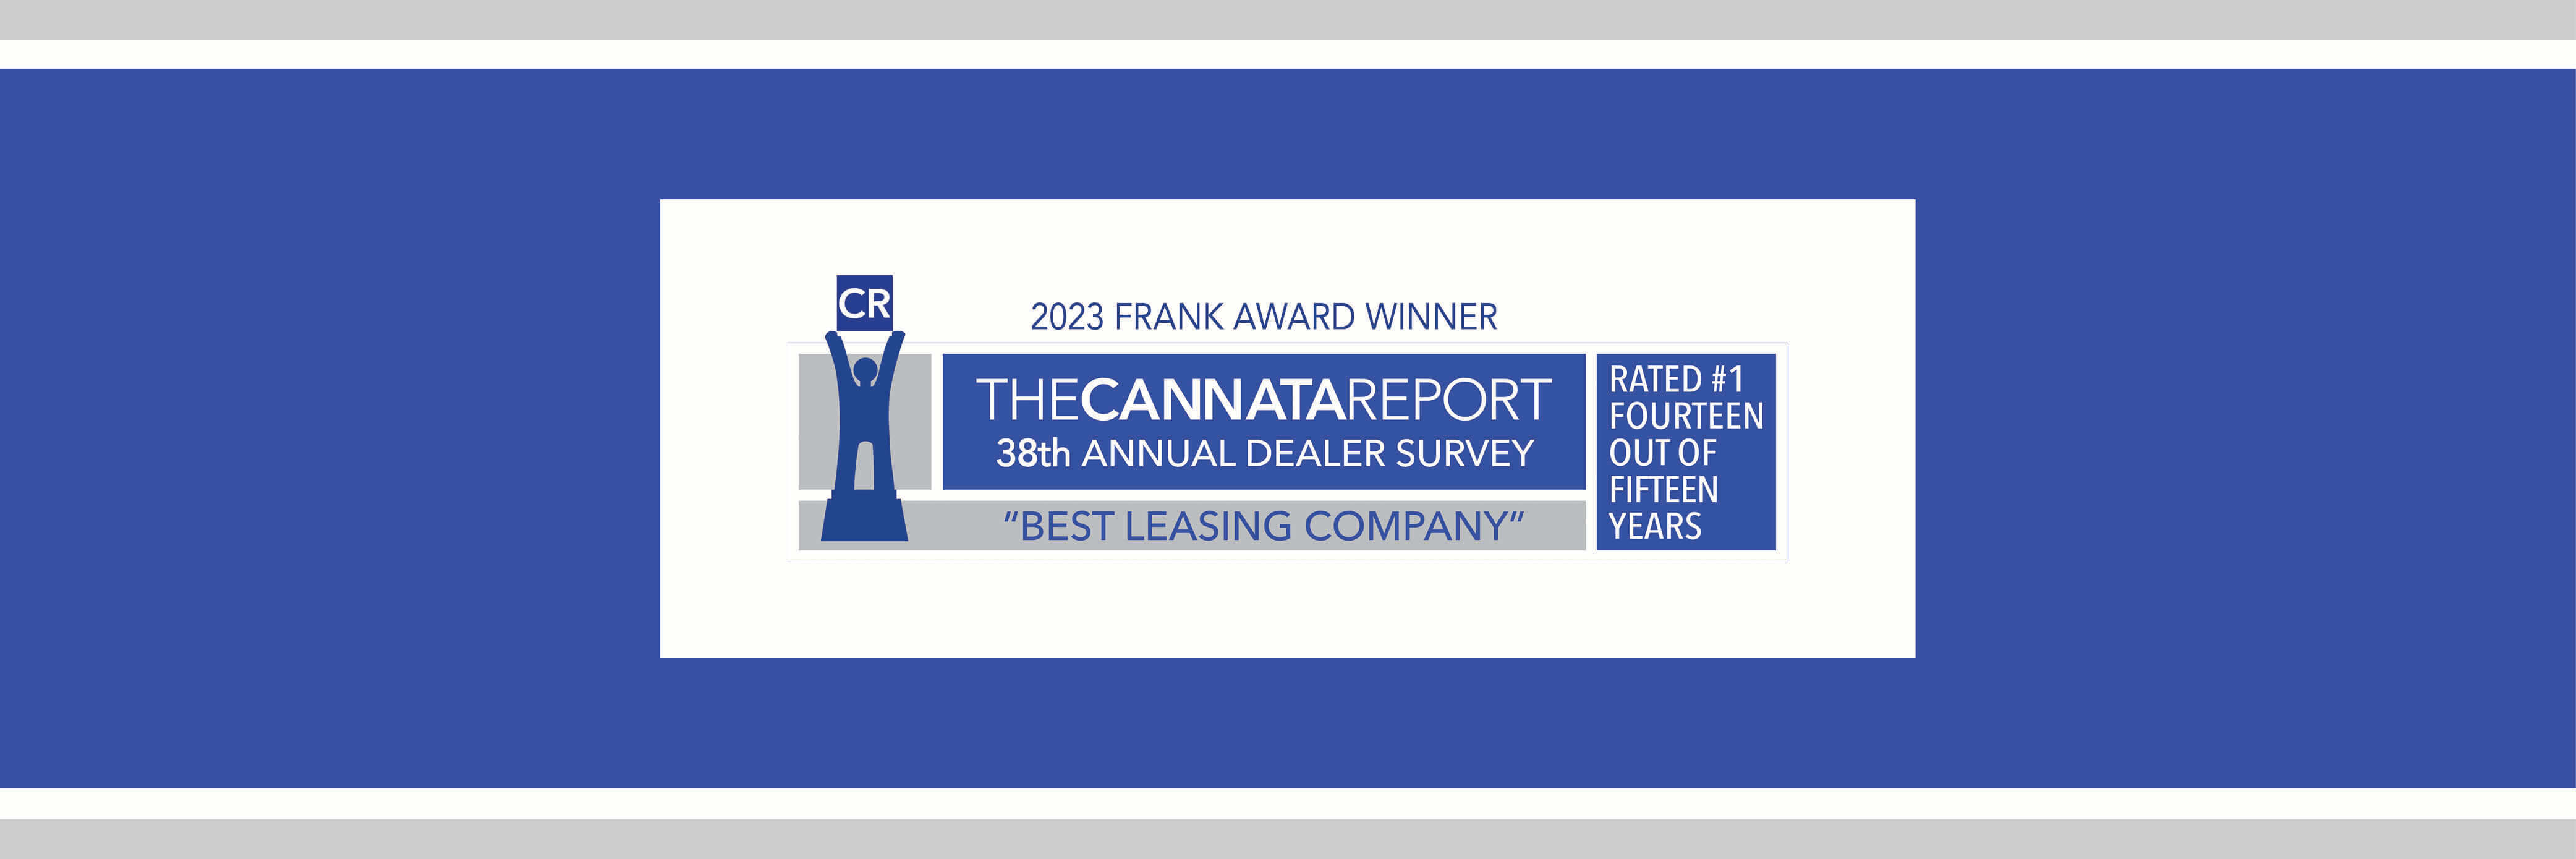 GreatAmerica Wins Two 2023 Frank Awards: Best Leasing Company and Best Female Executive